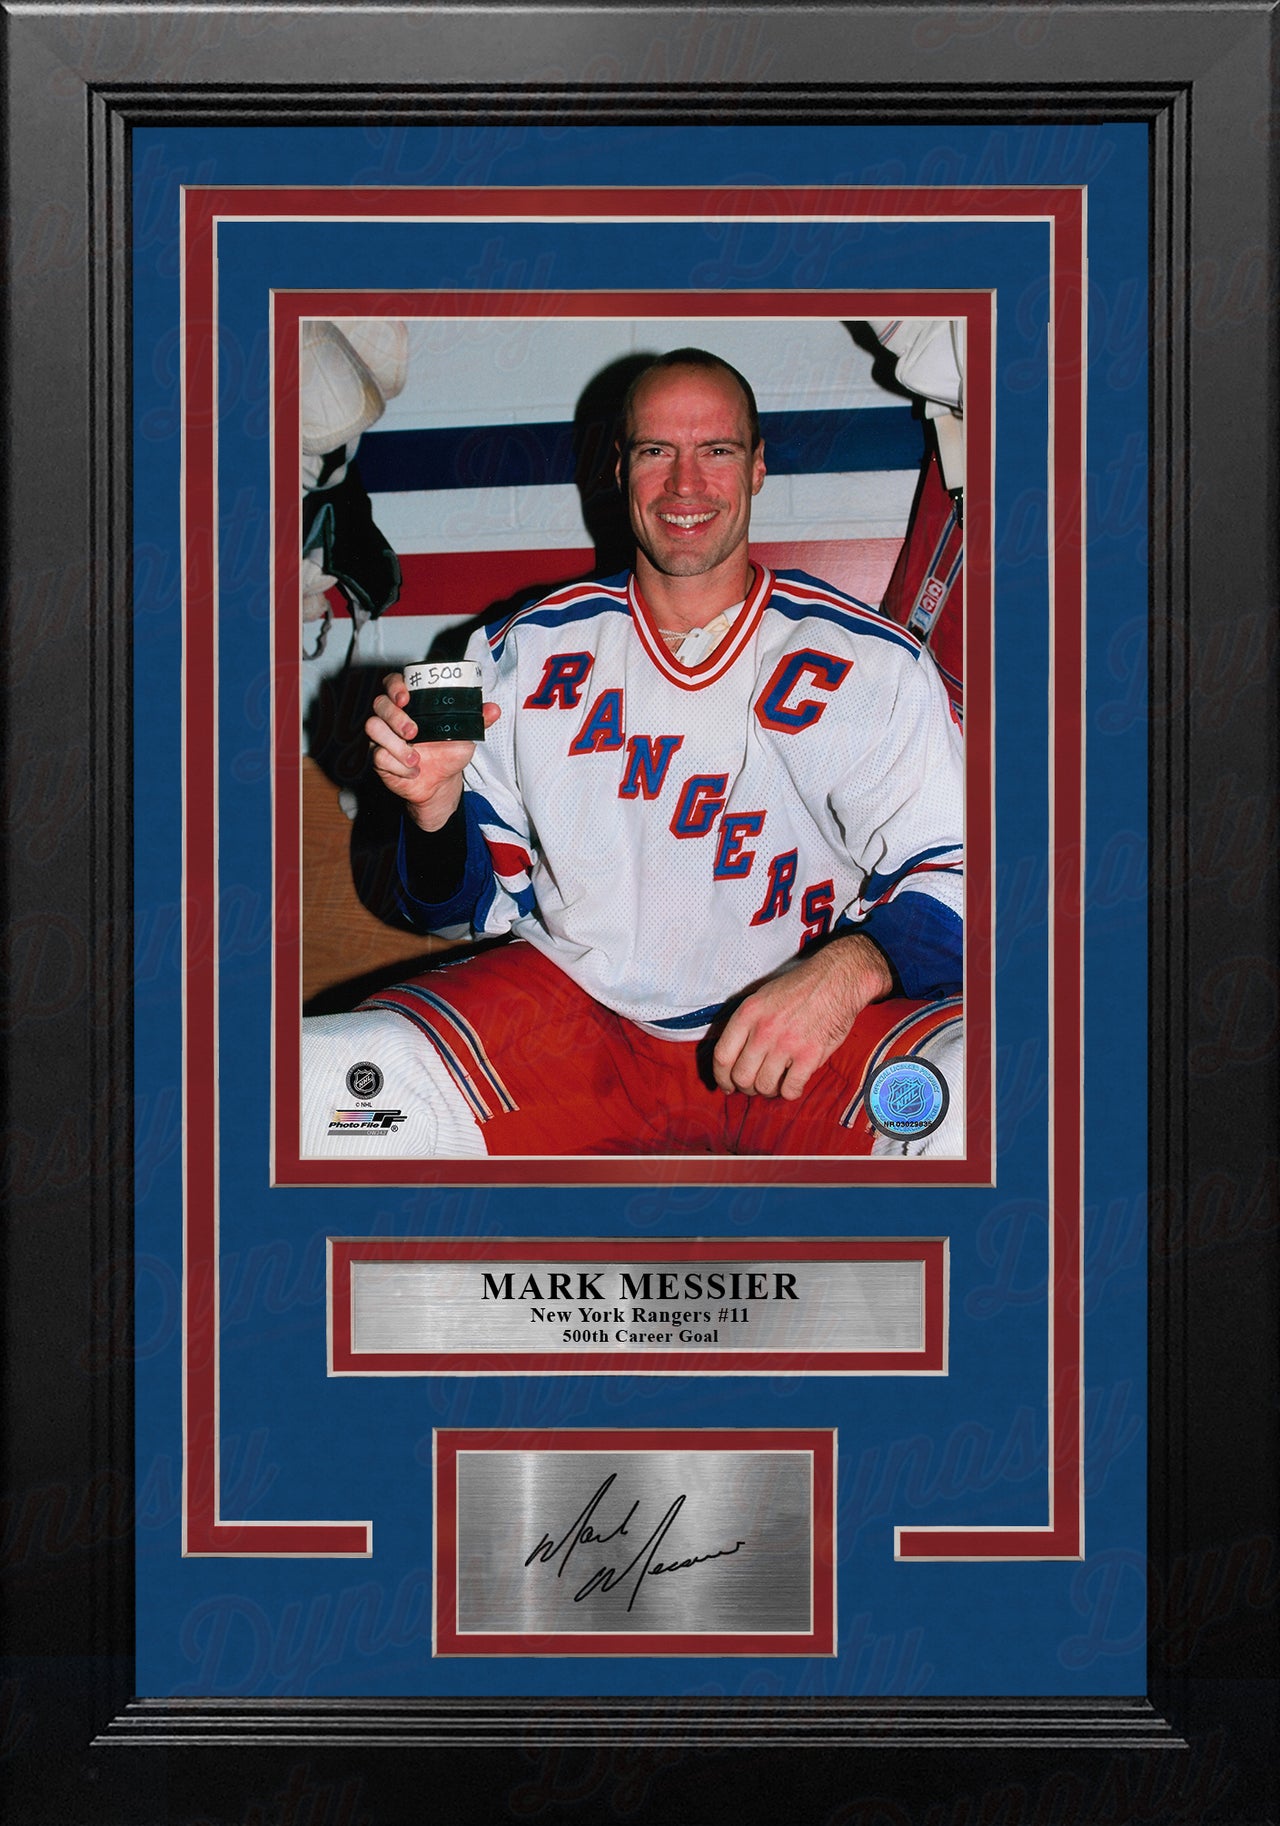 Mark Messier 500th Goal New York Rangers 8" x 10" Framed Hockey Photo with Engraved Autograph - Dynasty Sports & Framing 